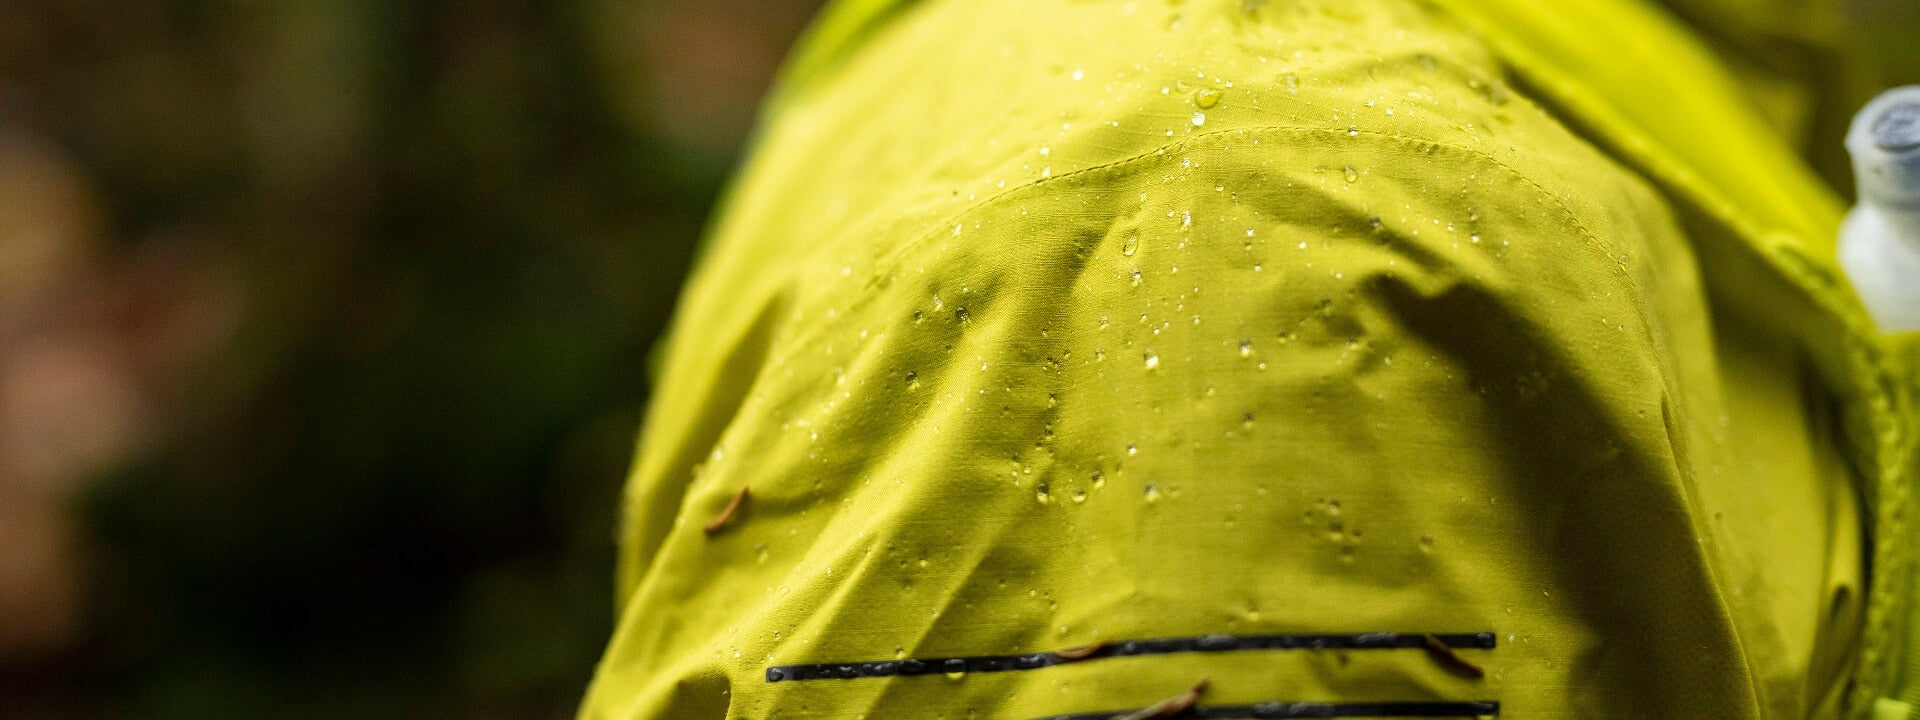 HOW TO WASH GORE-TEX CLOTHING AND RESTORE DURABLE WATER REPELLENCY (DWR)